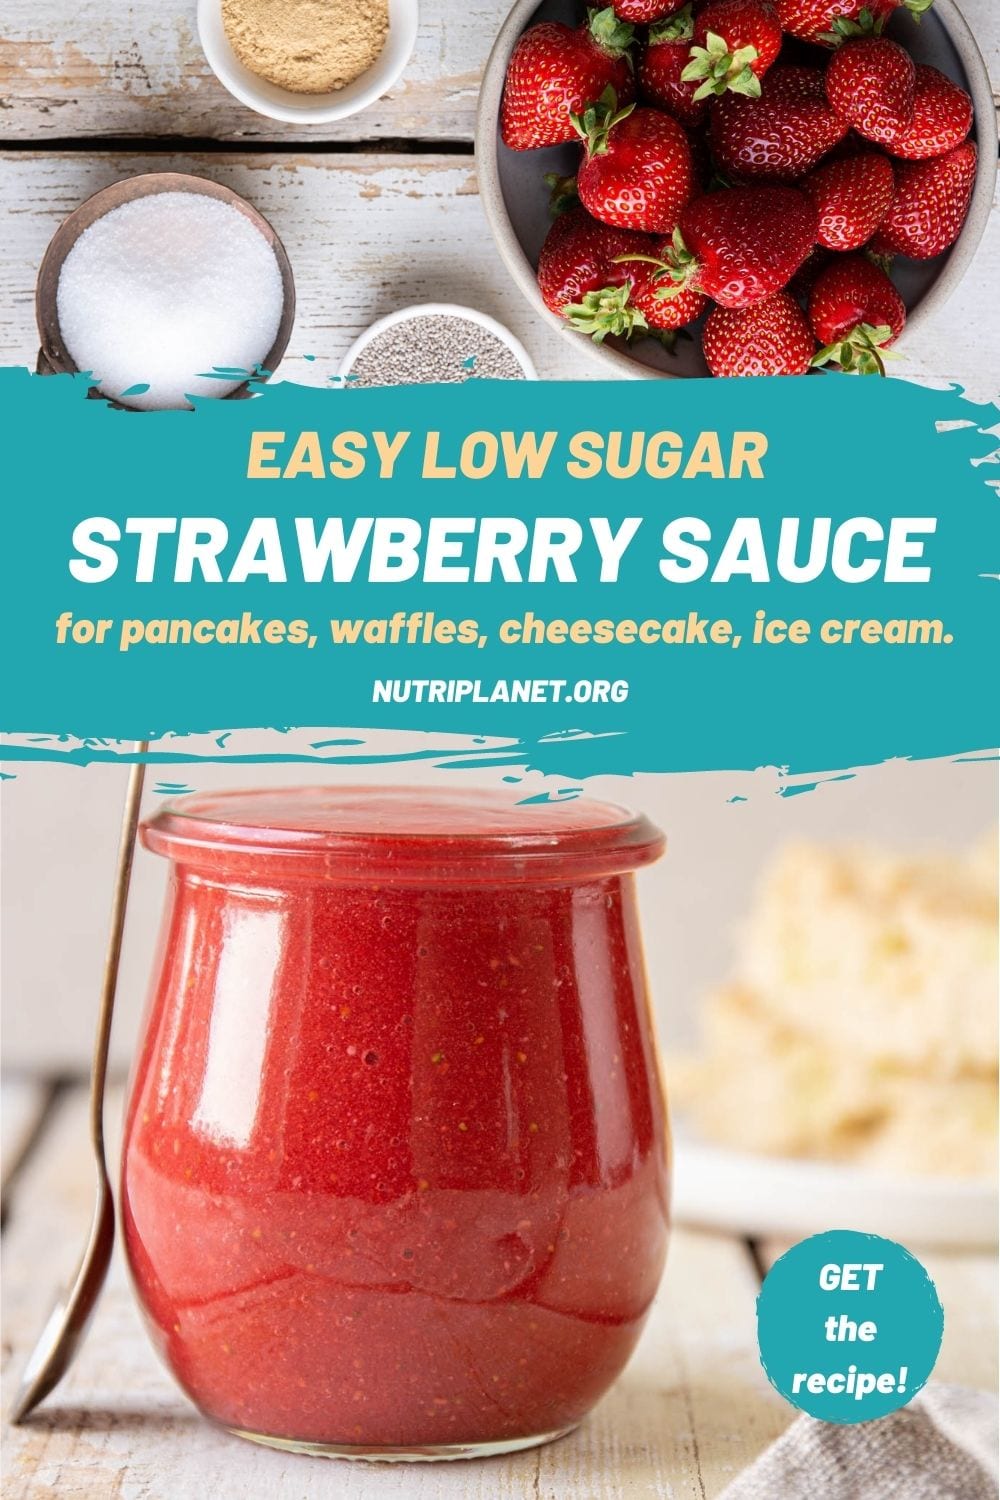 Let’s make an easy strawberry sauce using fresh strawberries. All you need is a blender and 3-4 ingredients. This sauce is ideal for pancakes, crepes, waffles, cheesecake, pound cake, ice cream, and other desserts.